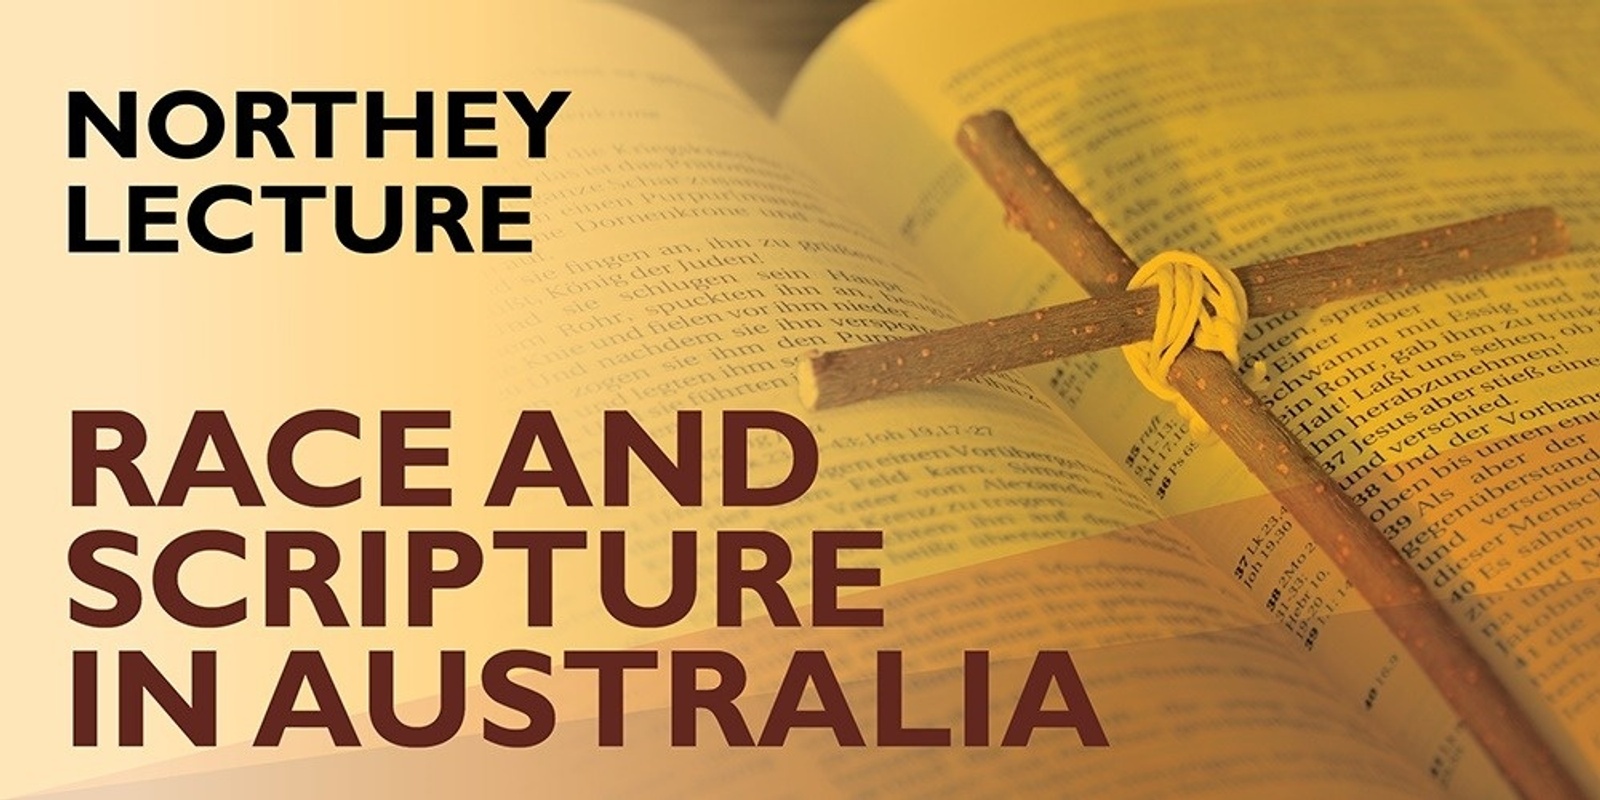 Banner image for Northey Lecture: "Race and Scripture in Australia" by Meredith Lake